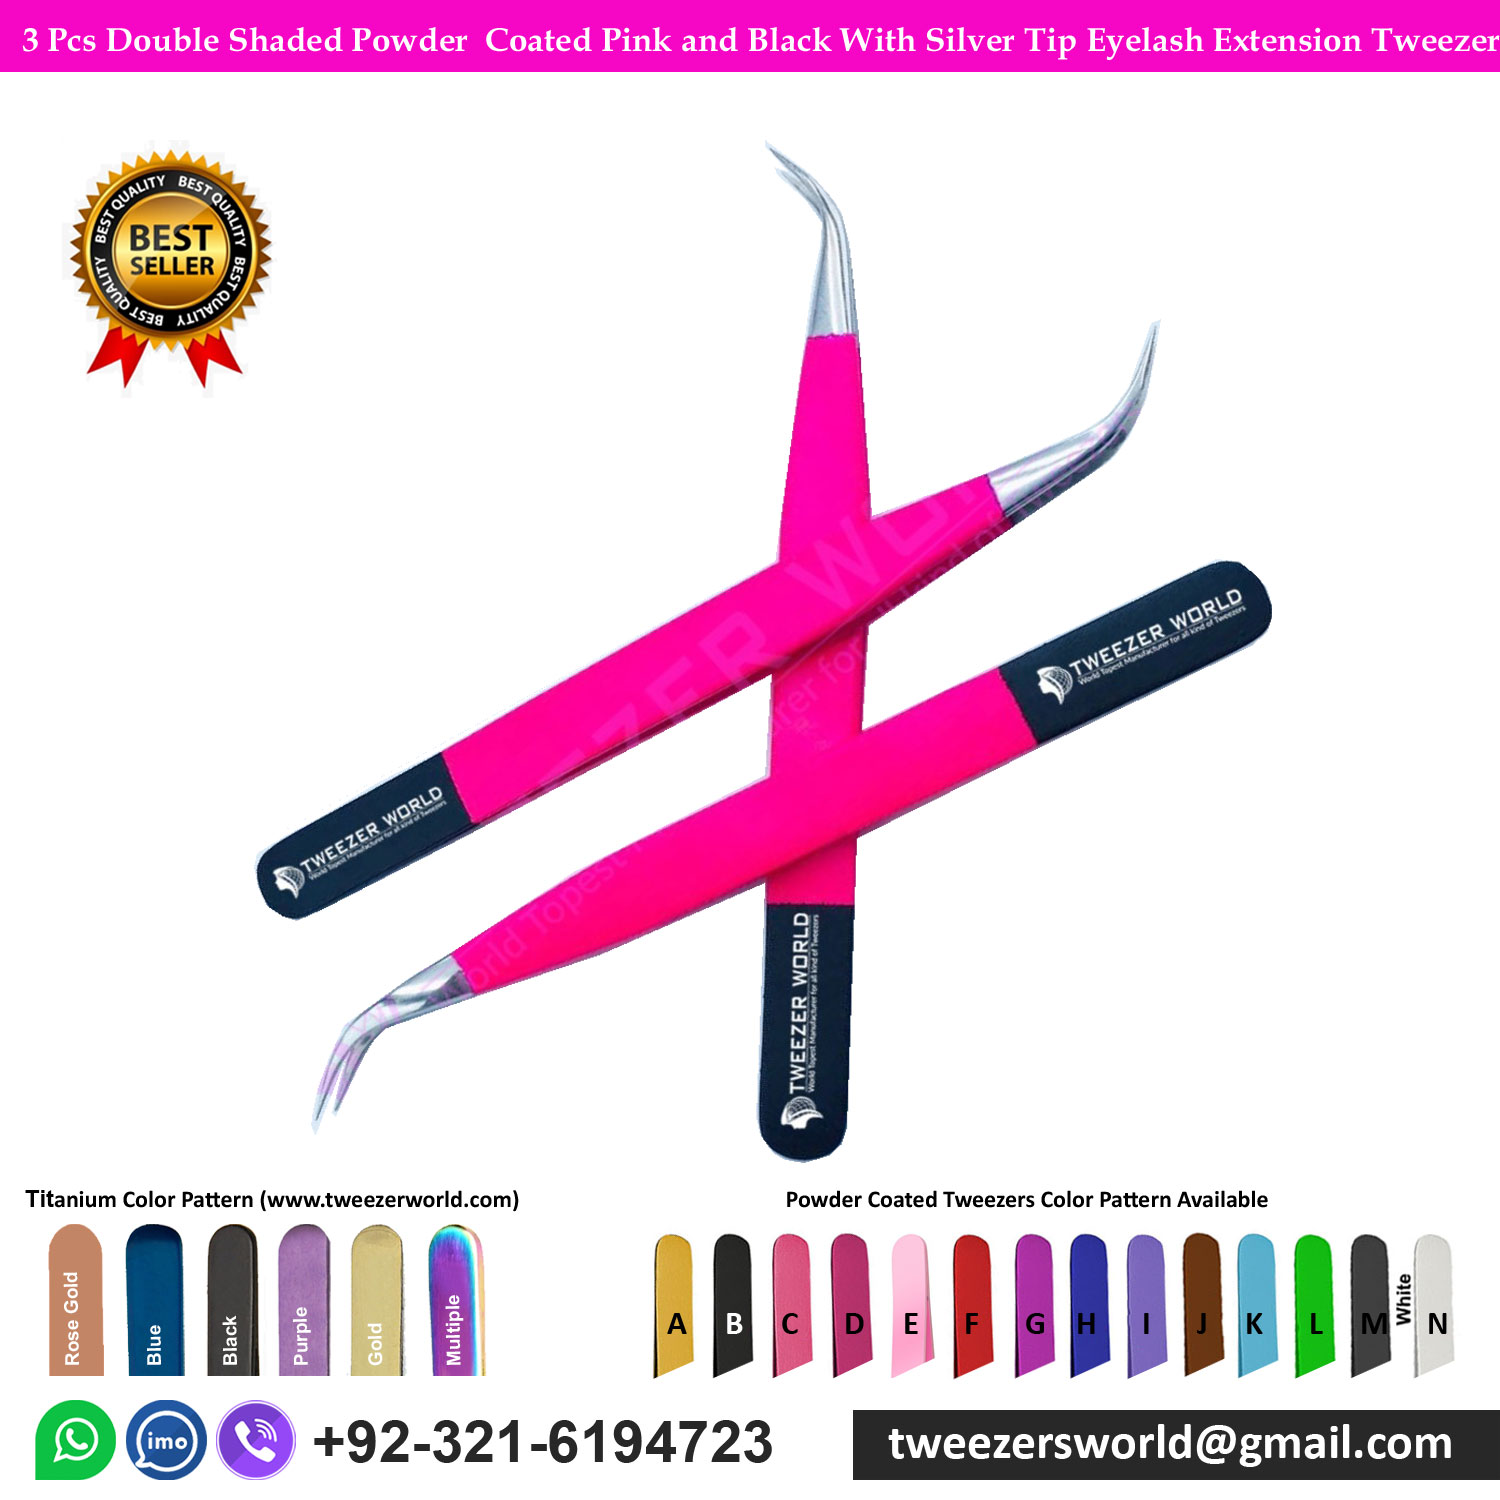 3 Pcs Double Shaded Powder  Coated Pink and Black With Silver Tip Eyelash Extension Tweezers